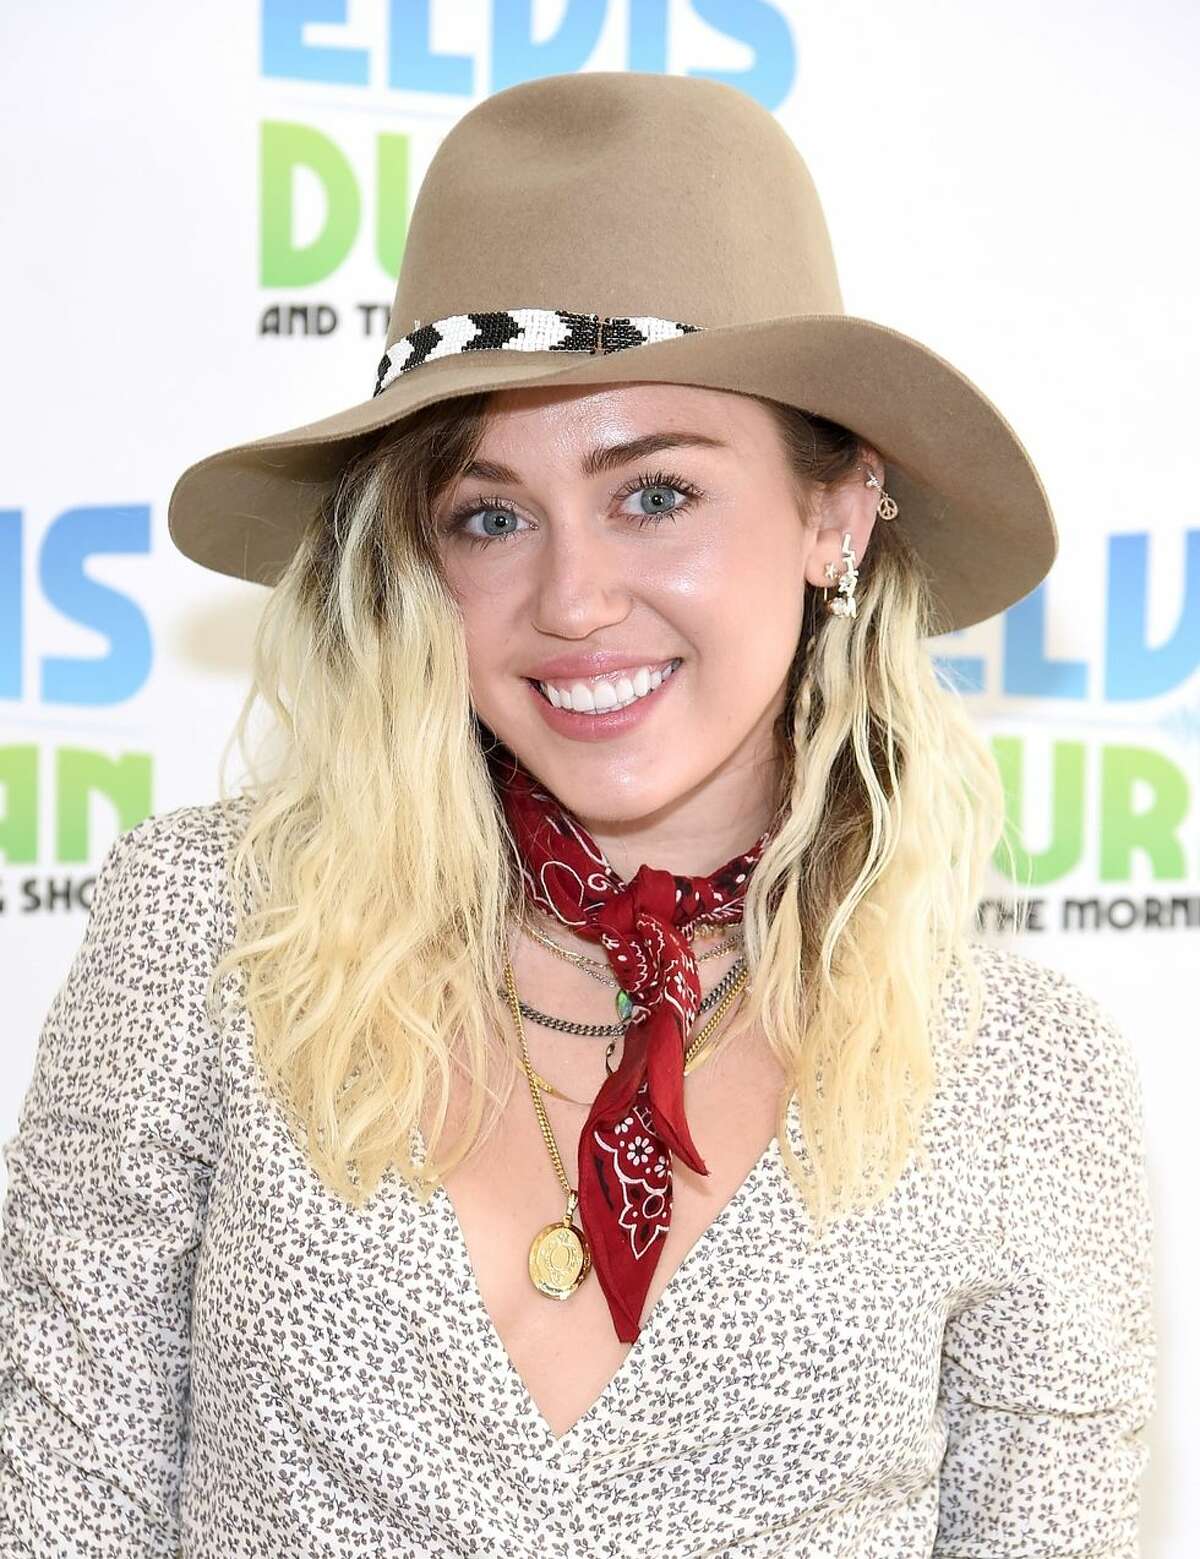 Miley Cyrus: The singer revamped her image and sound with her "Younger Now" album but still did not get any nominations.